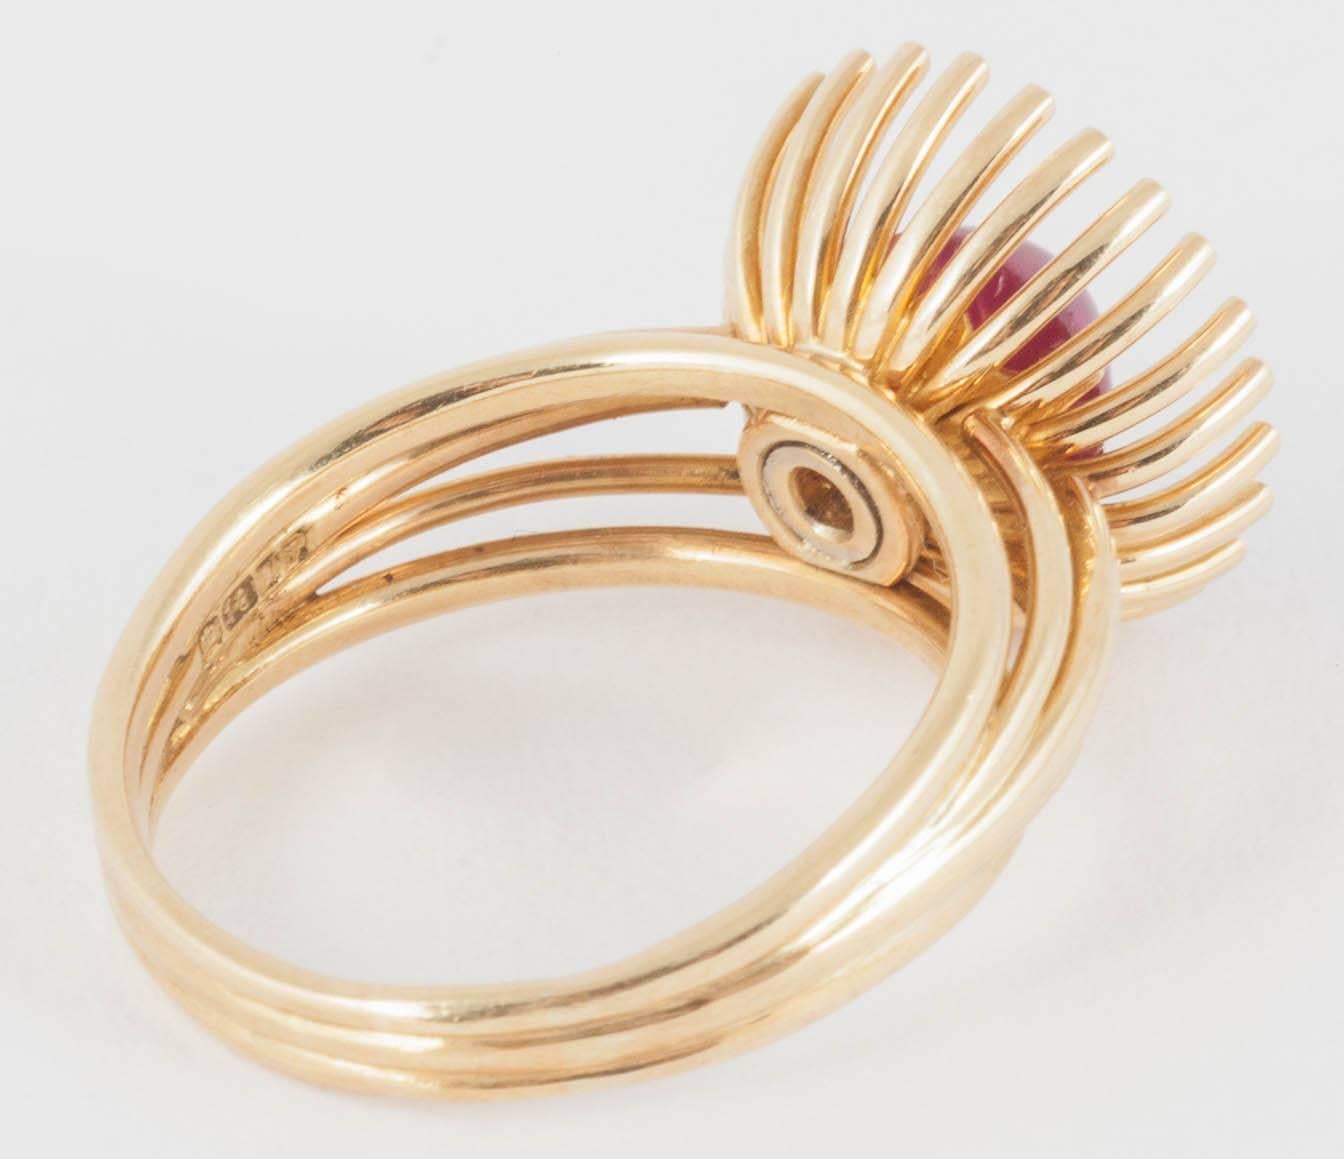 Hans Mautner London1954 Cabochon Ruby Gold Ring For Sale 4